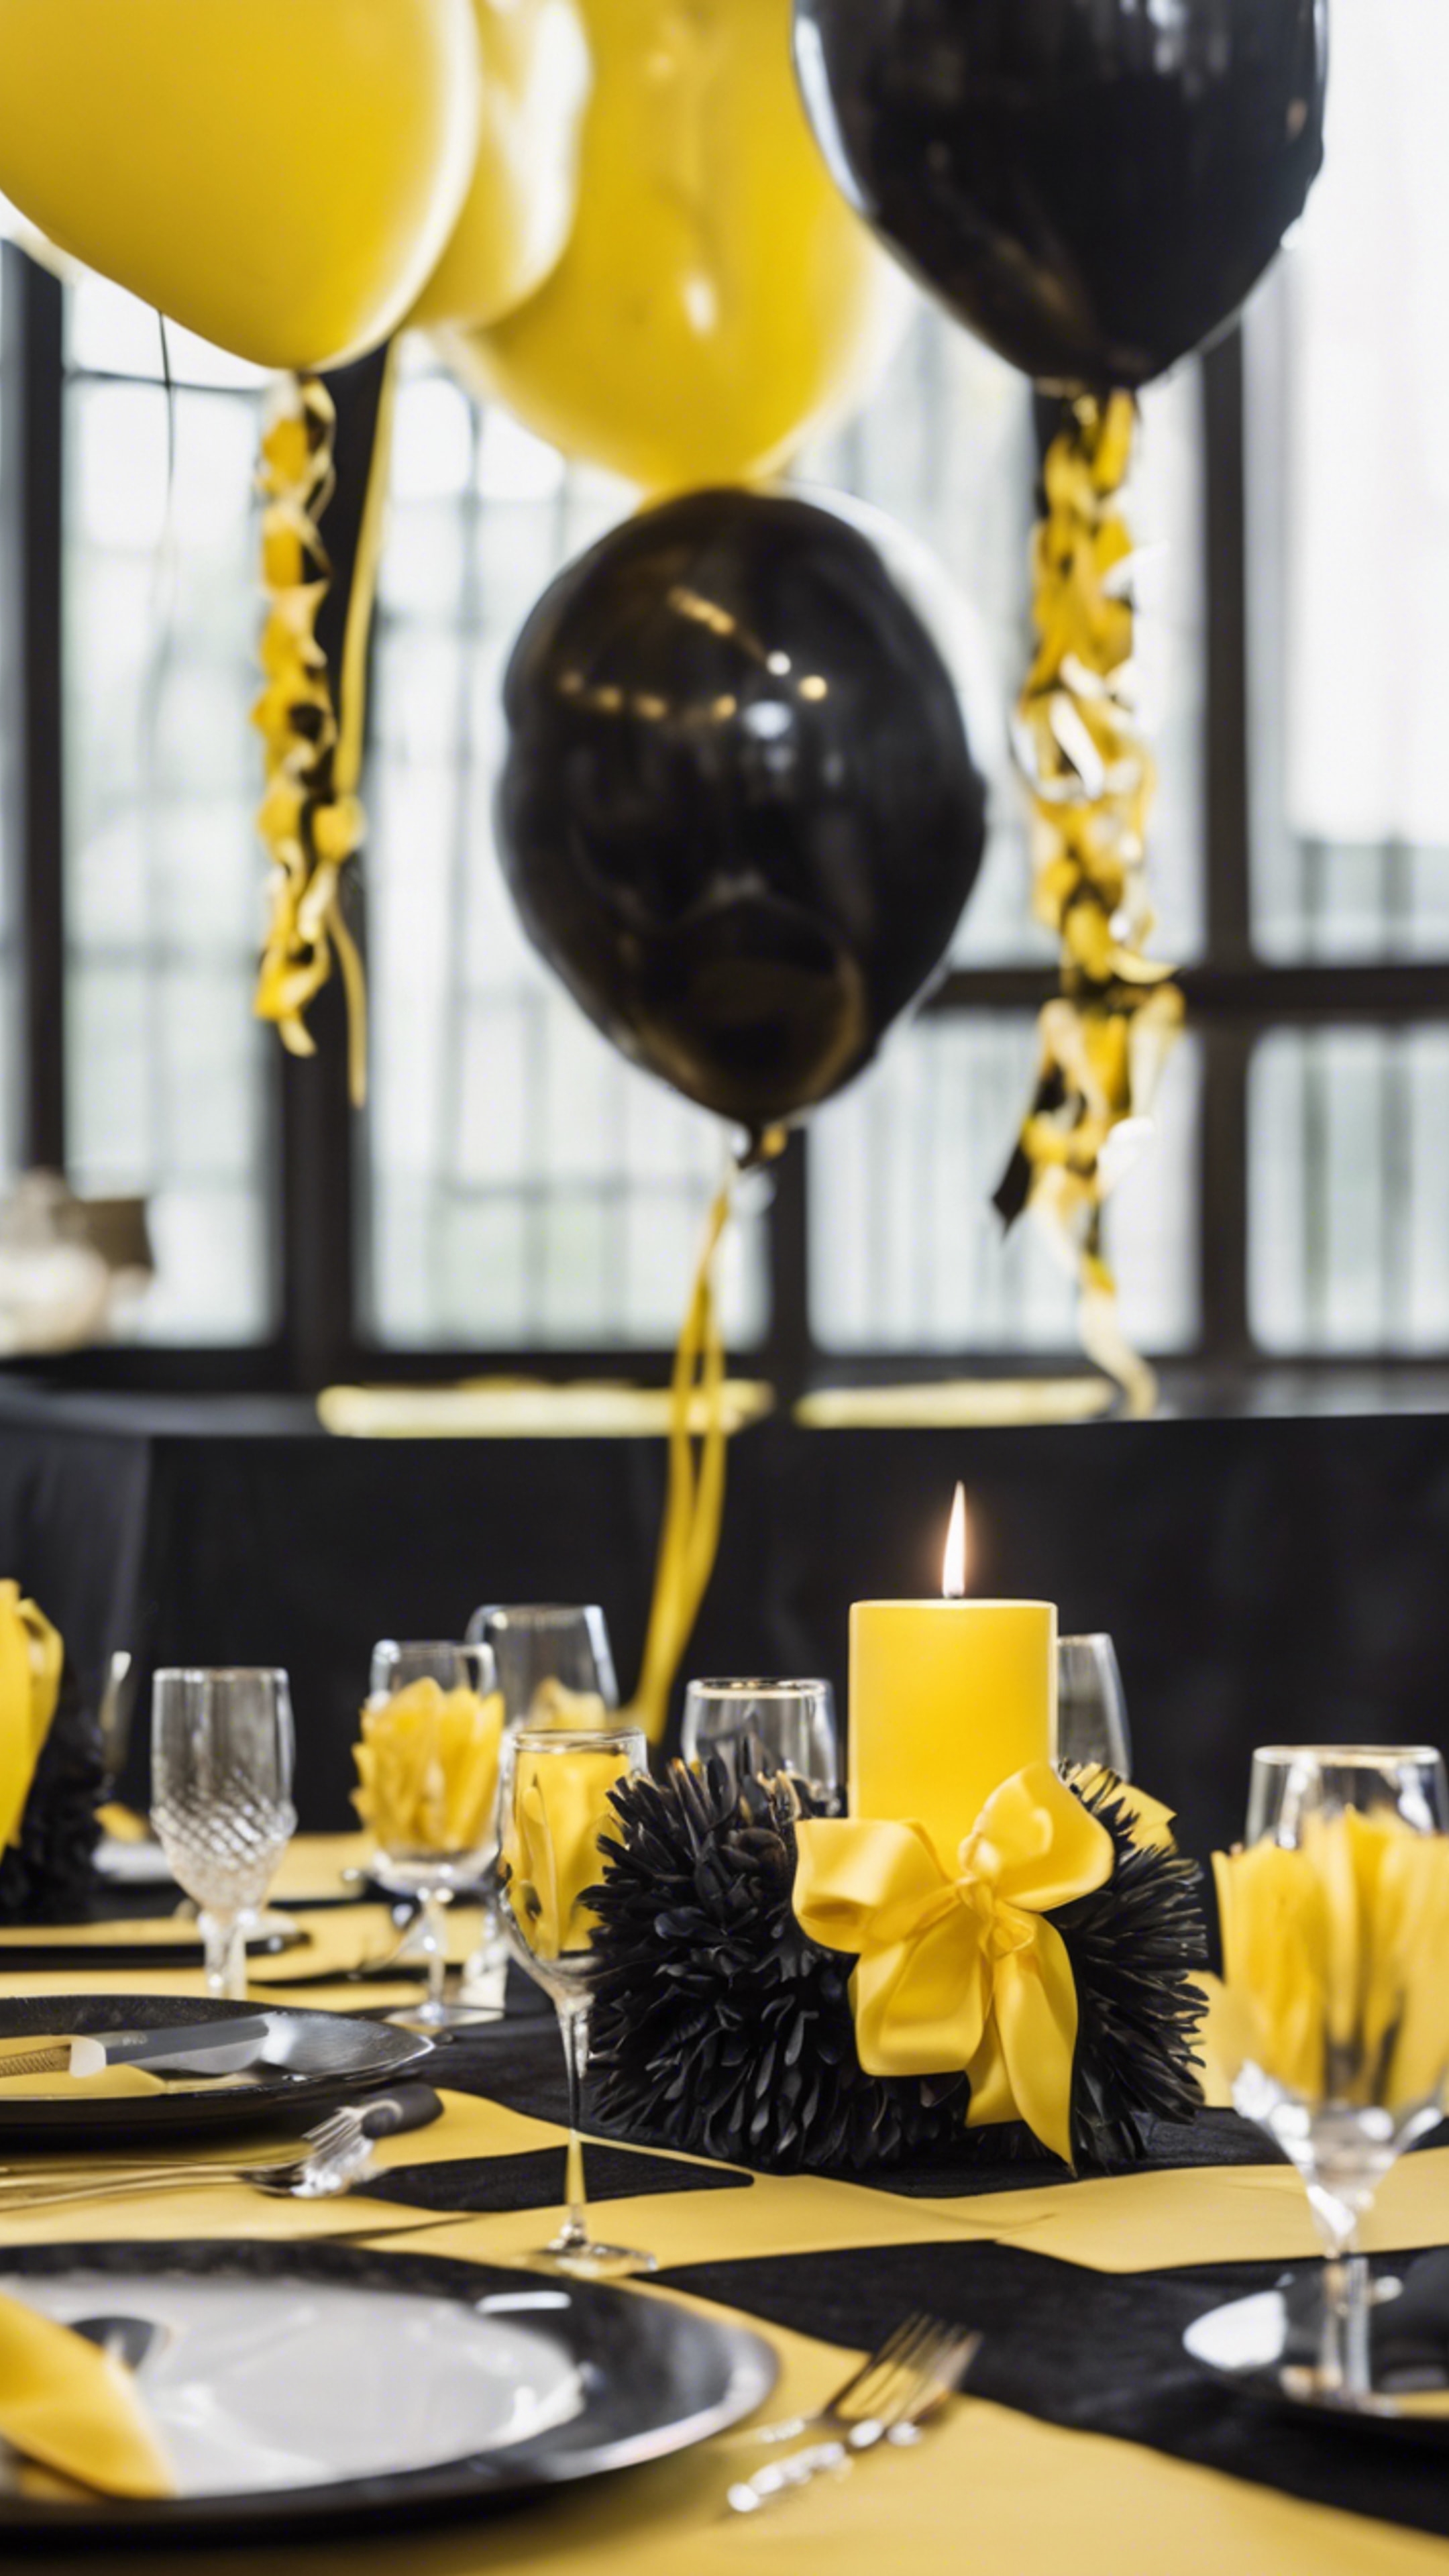 A table set with black and yellow themed party decorations for a birthday celebration. Hình nền[799426b85ea14846a022]